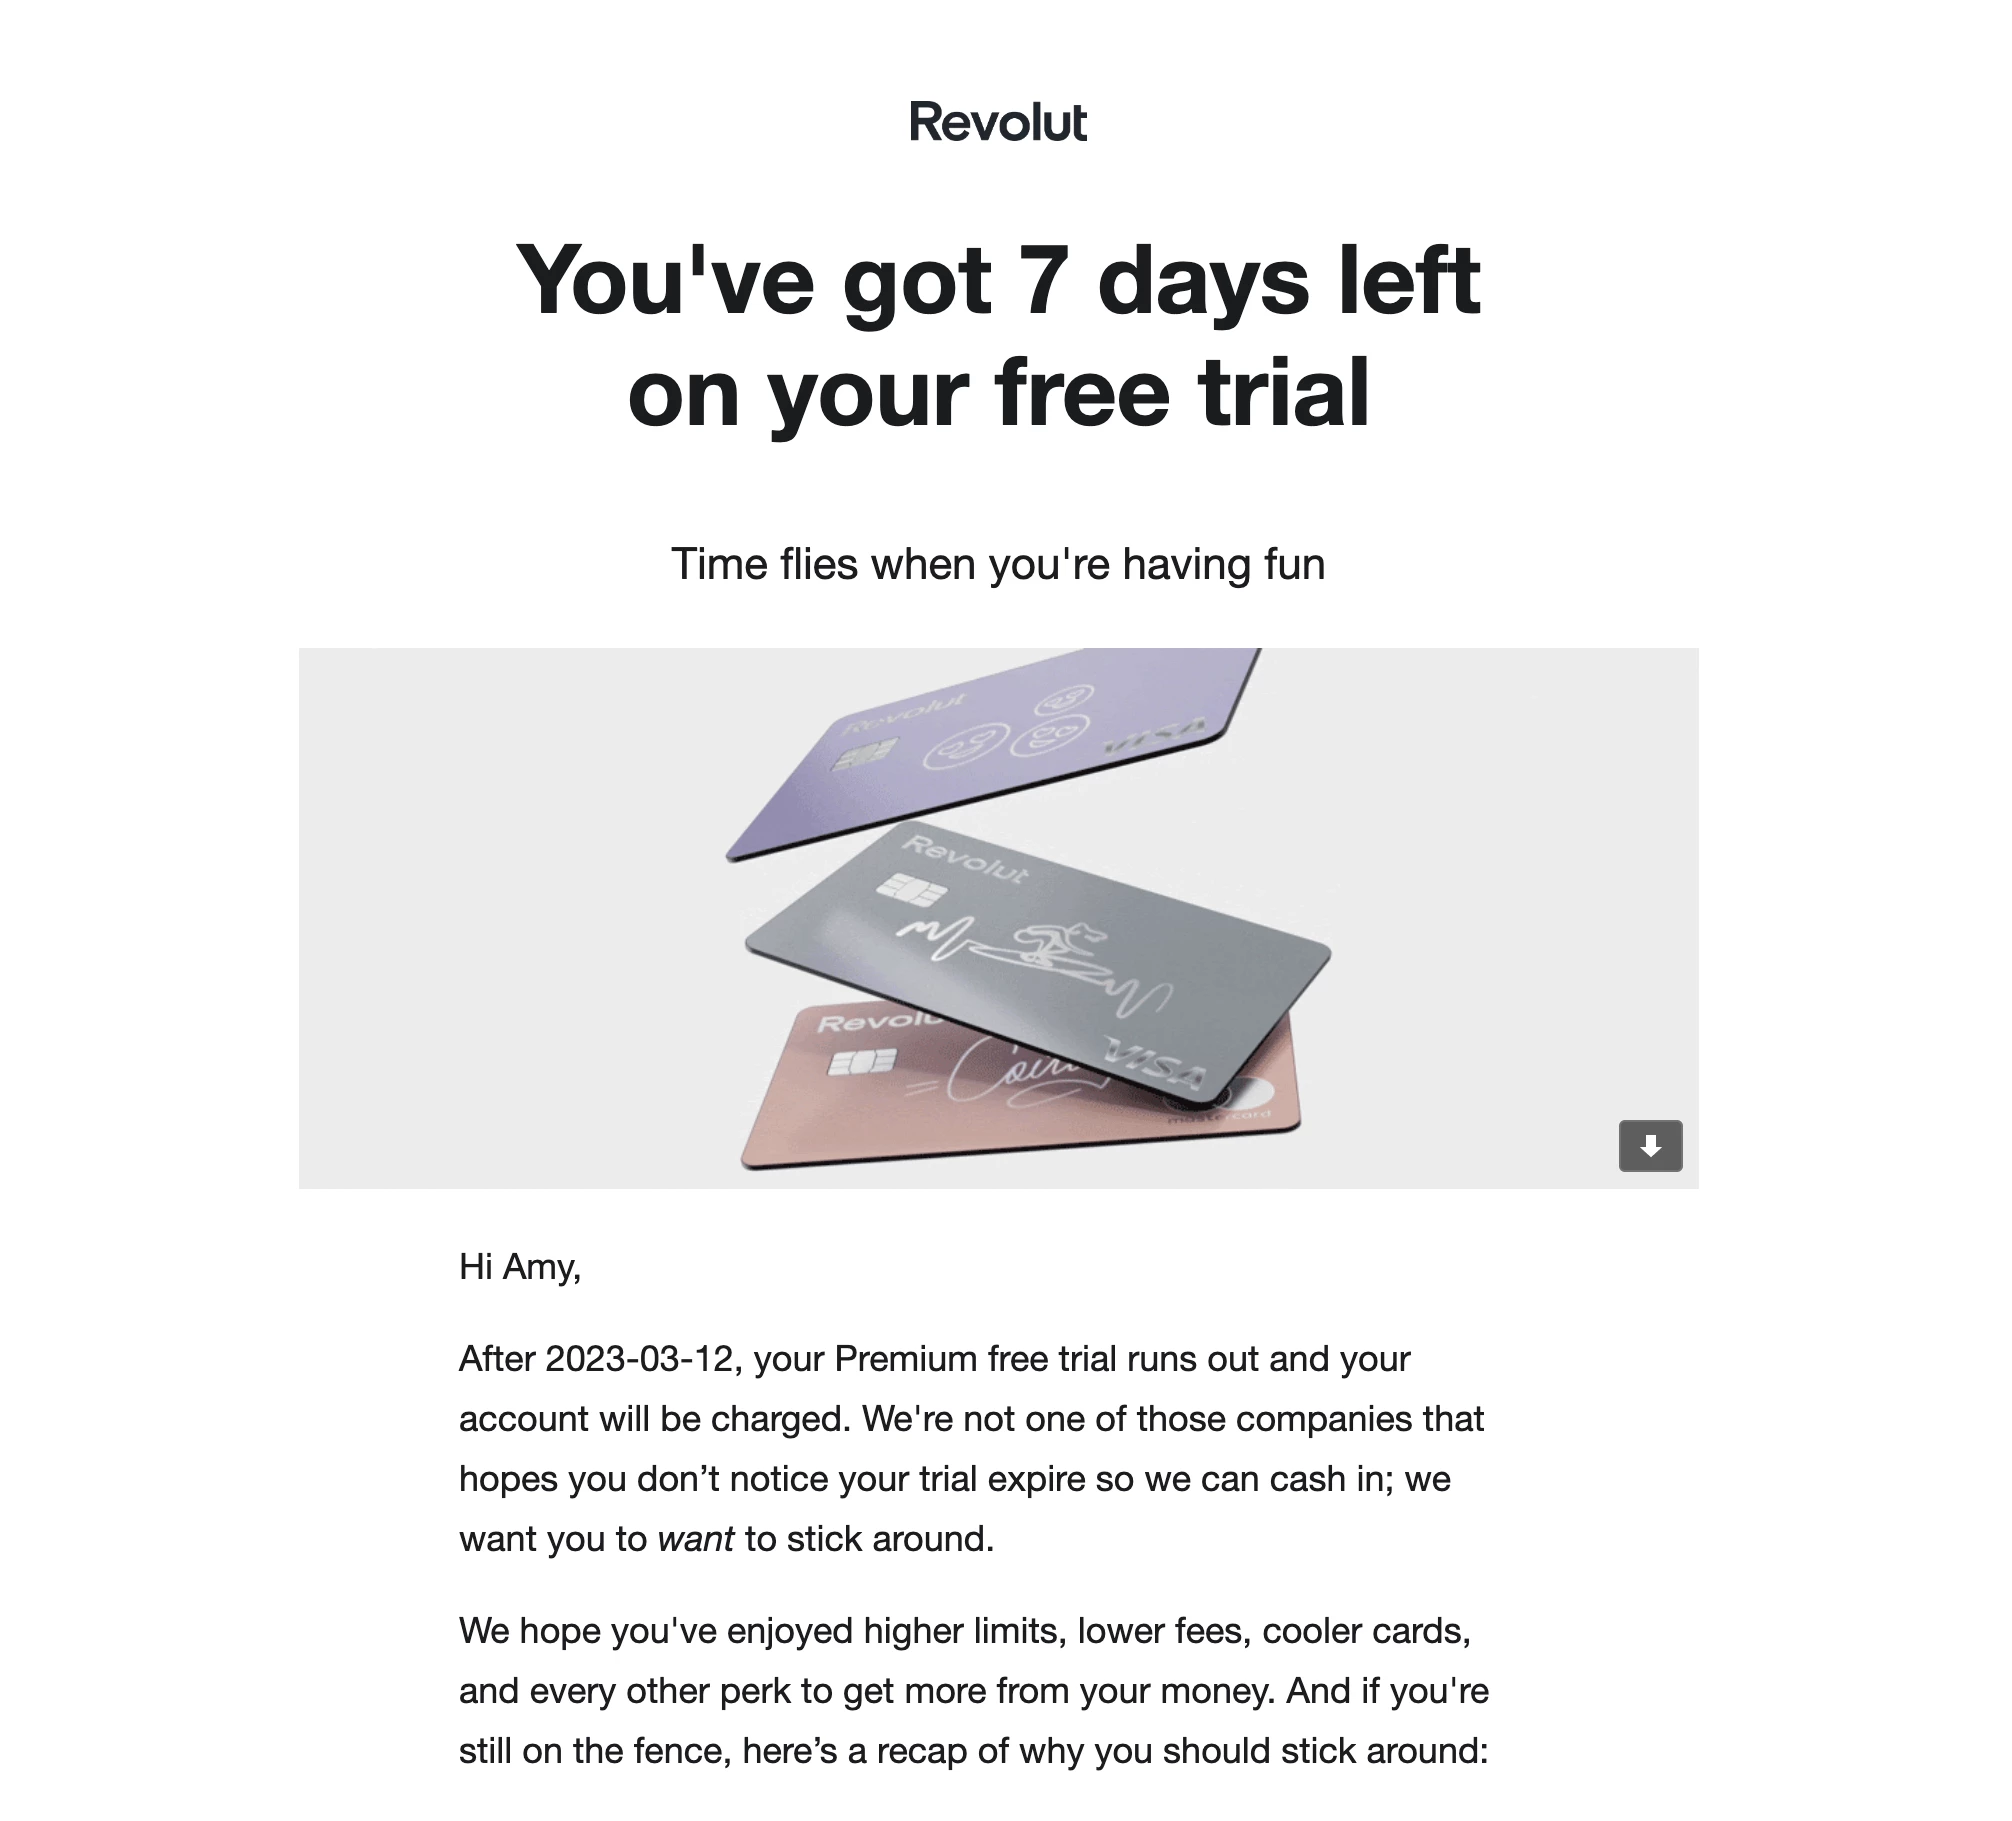 Revolut free trial expiration showcasing their brand voice and style.